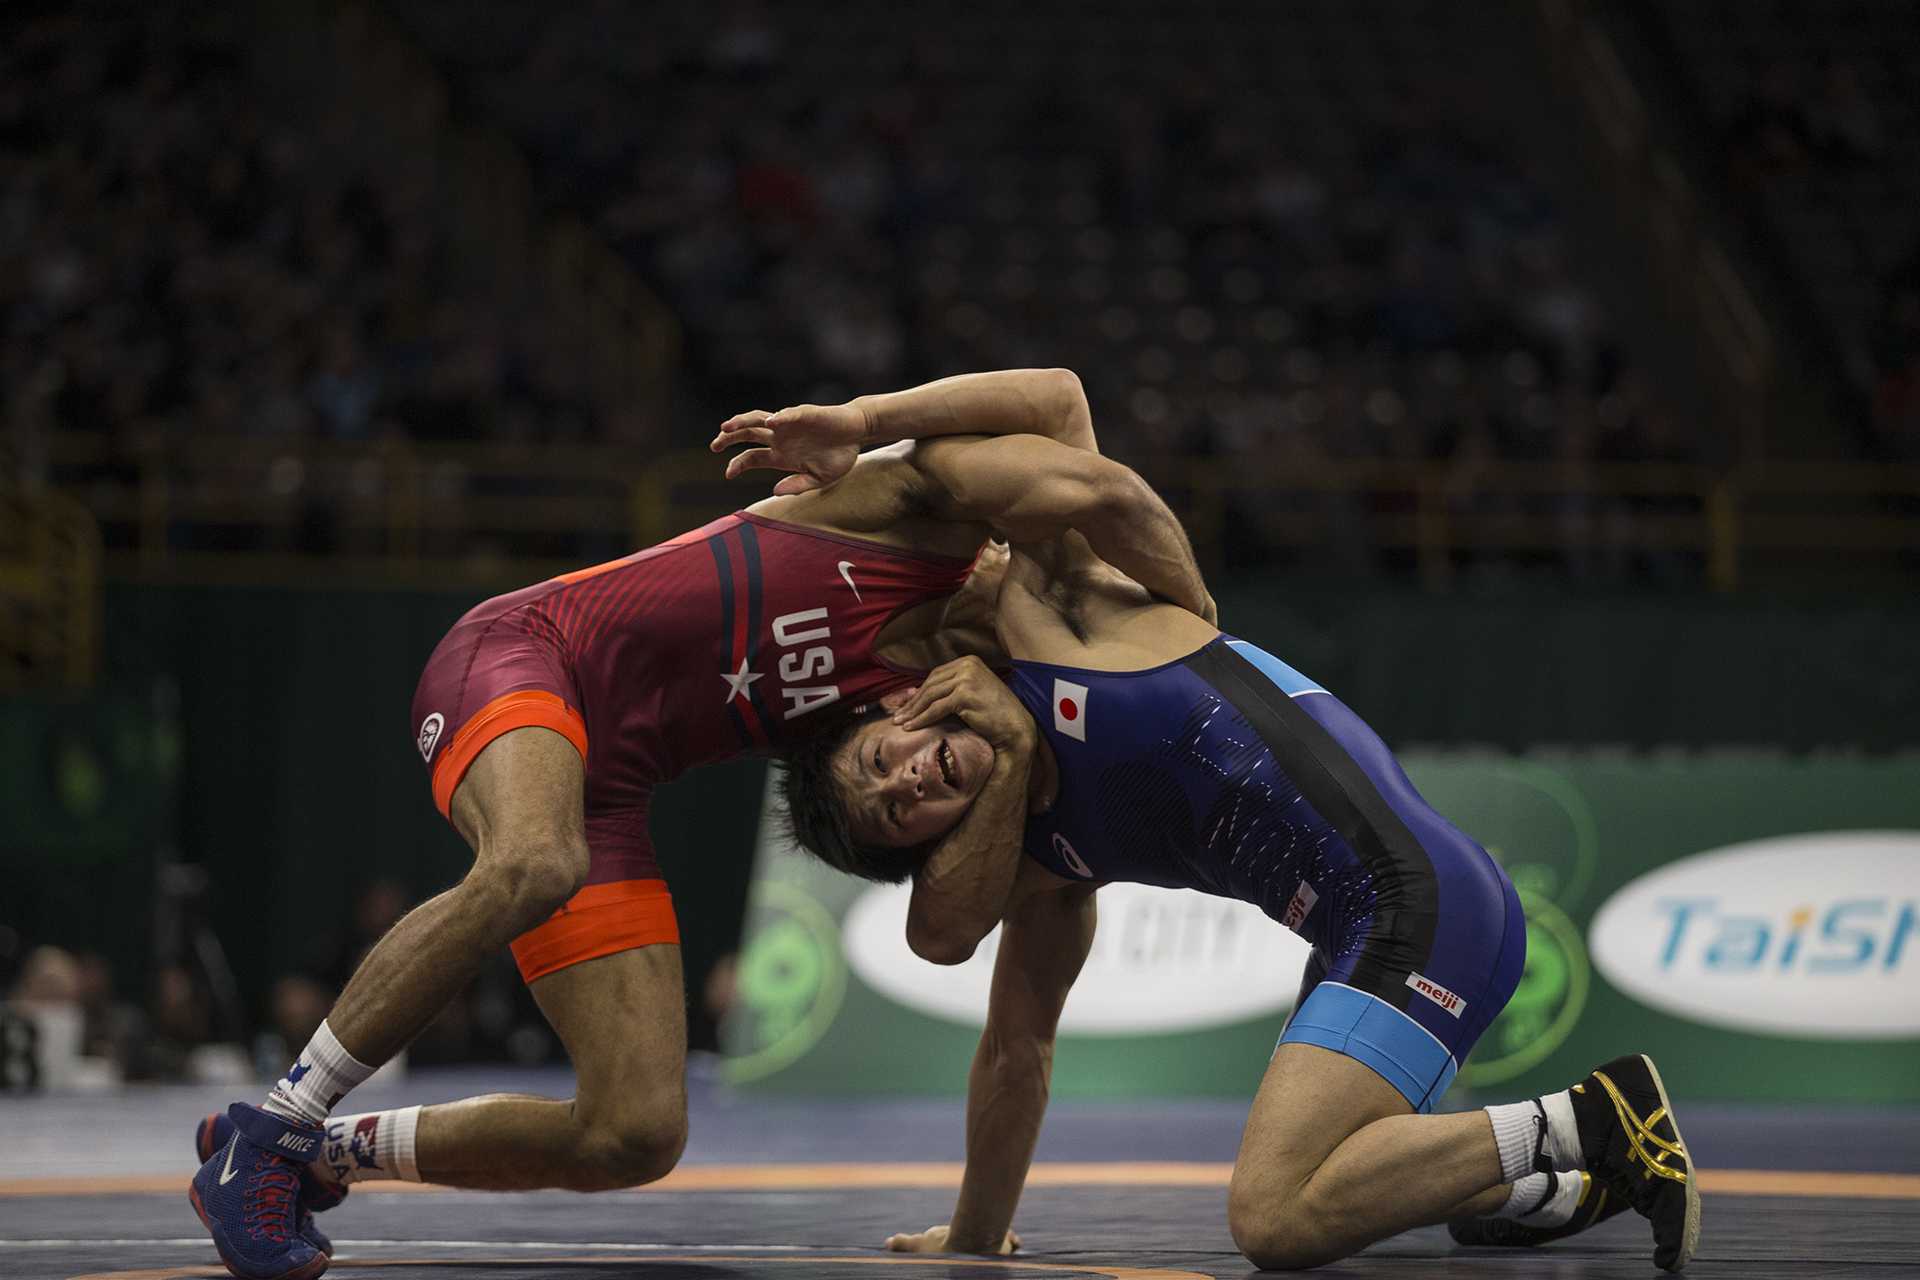 Photos: 2018 Men's Freestyle Wrestling World Cup (Session 2) - The Daily Iowan